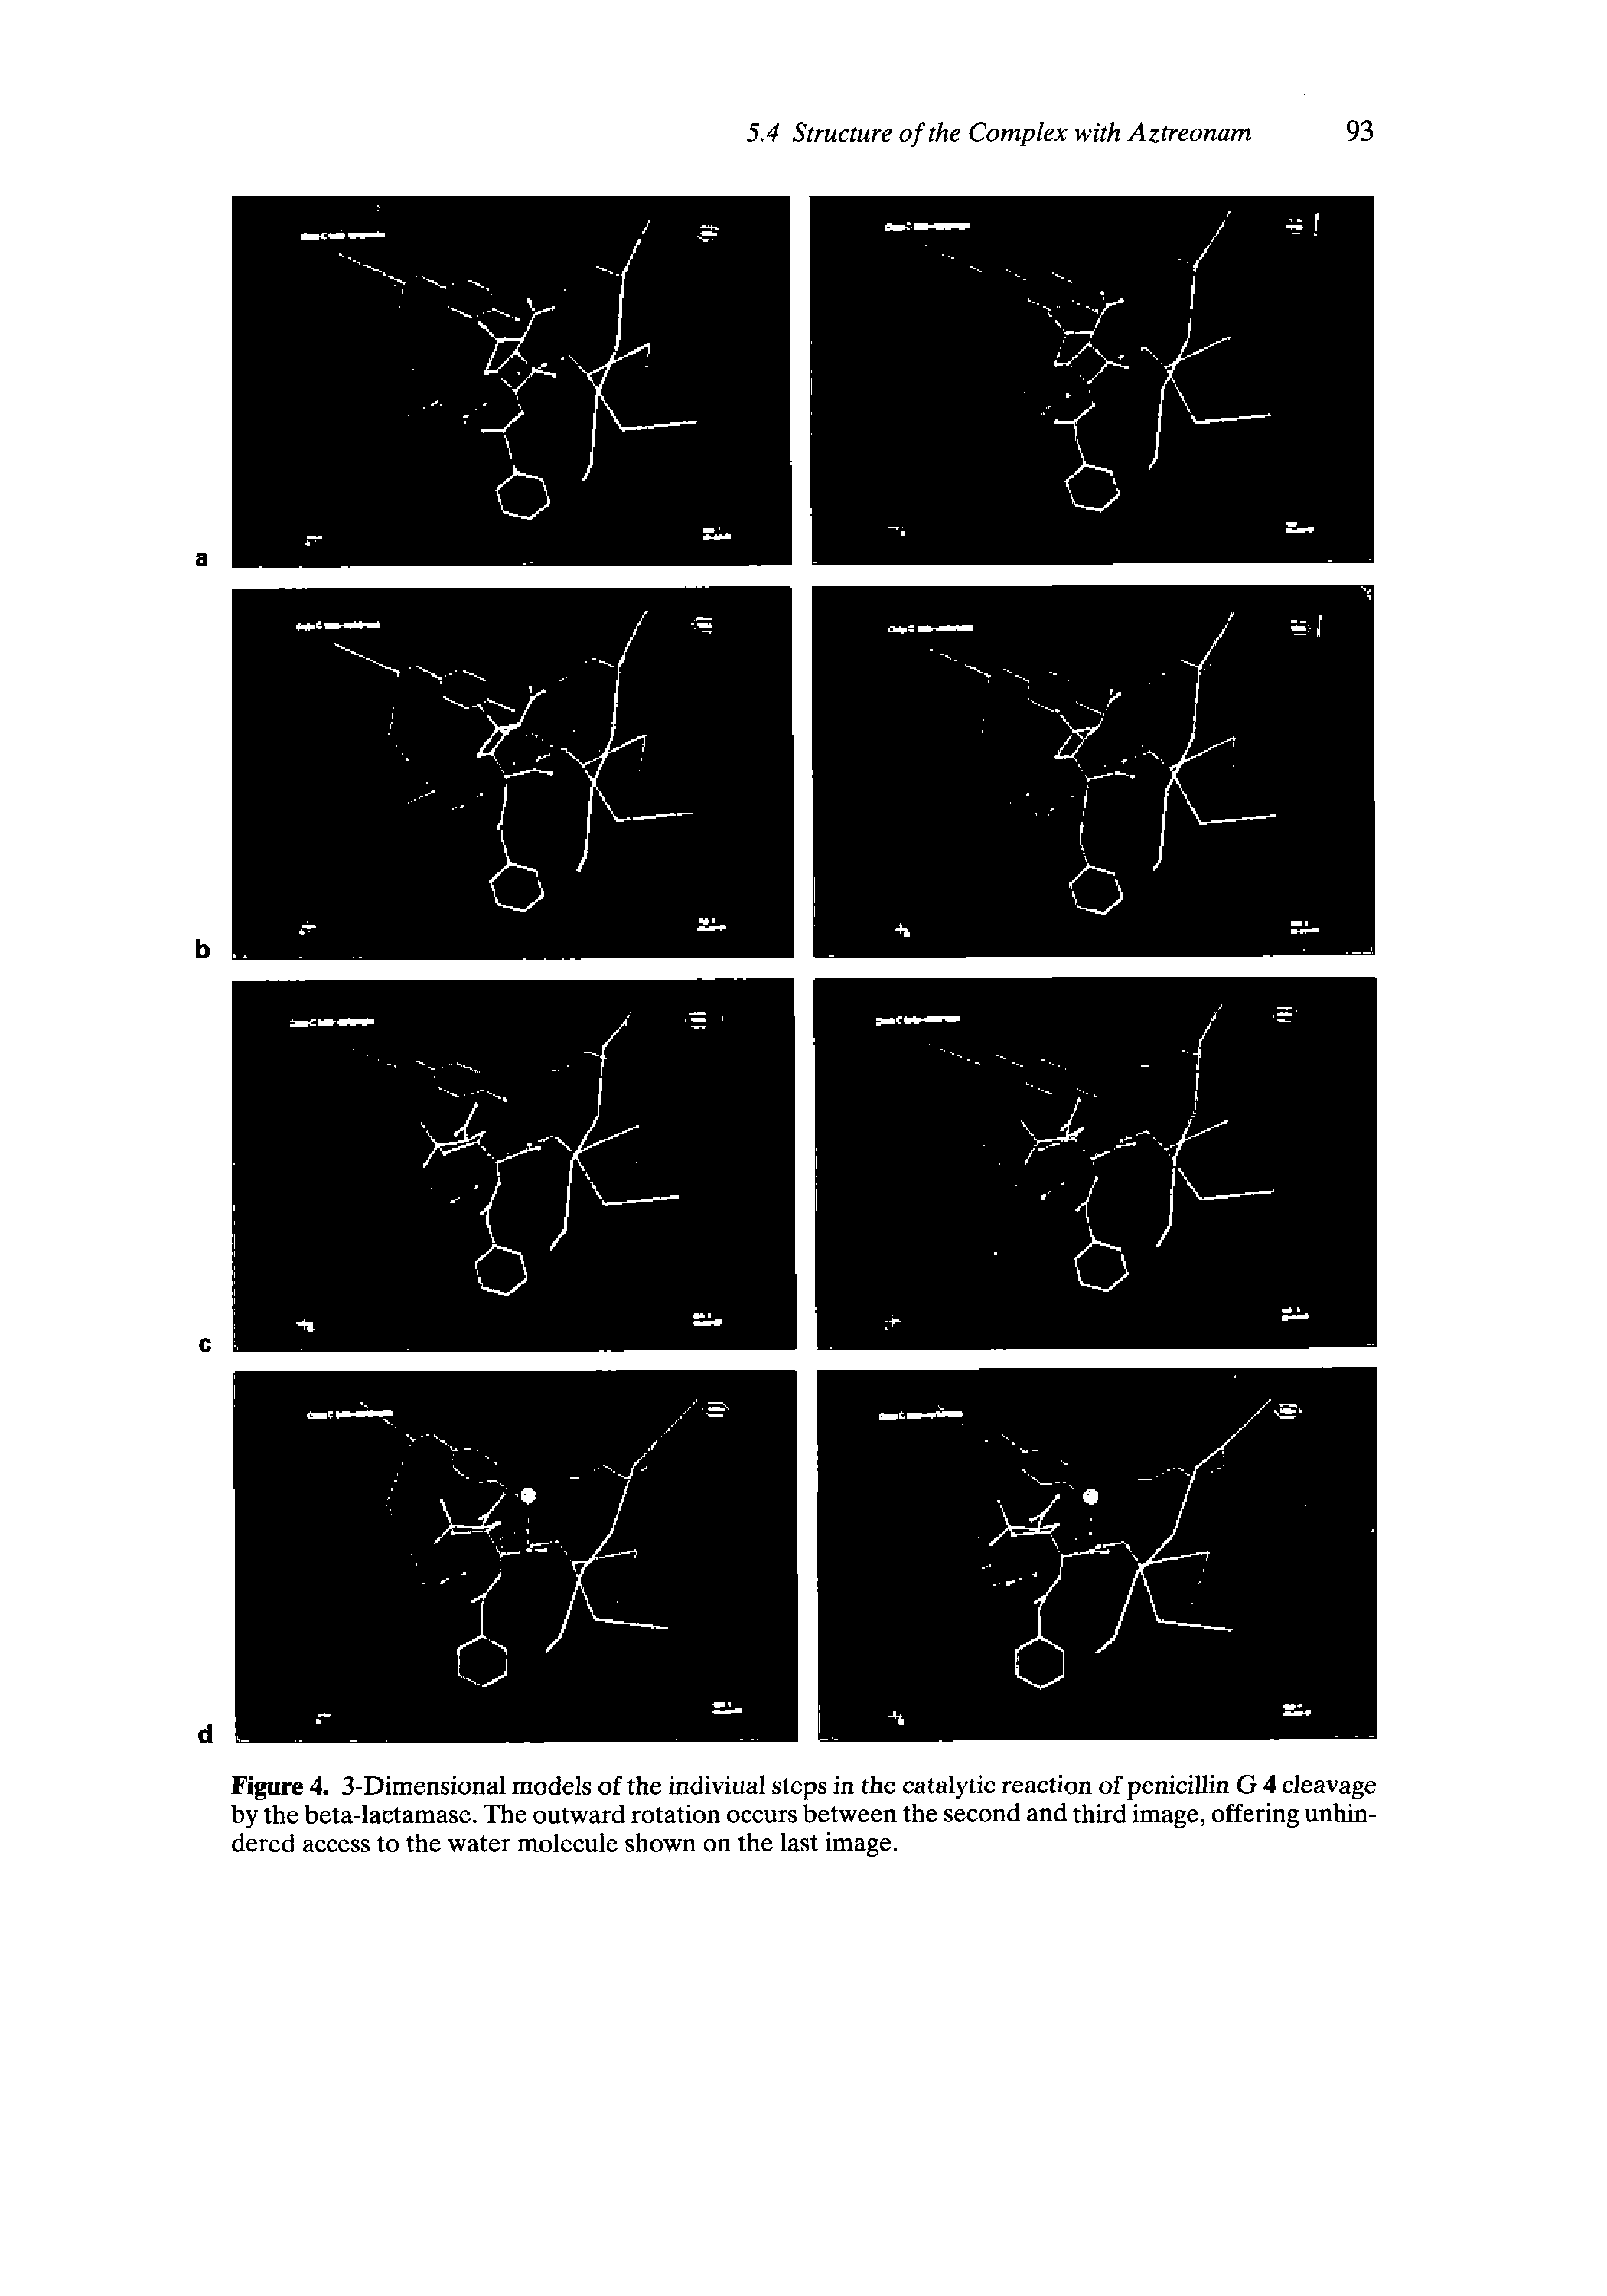 Figure 4. 3-Dimensional models of the indiviual steps in the catalytic reaction of penicillin G 4 cleavage by the beta-lactamase. The outward rotation occurs between the second and third image, offering unhindered access to the water moleeule shown on the last image.